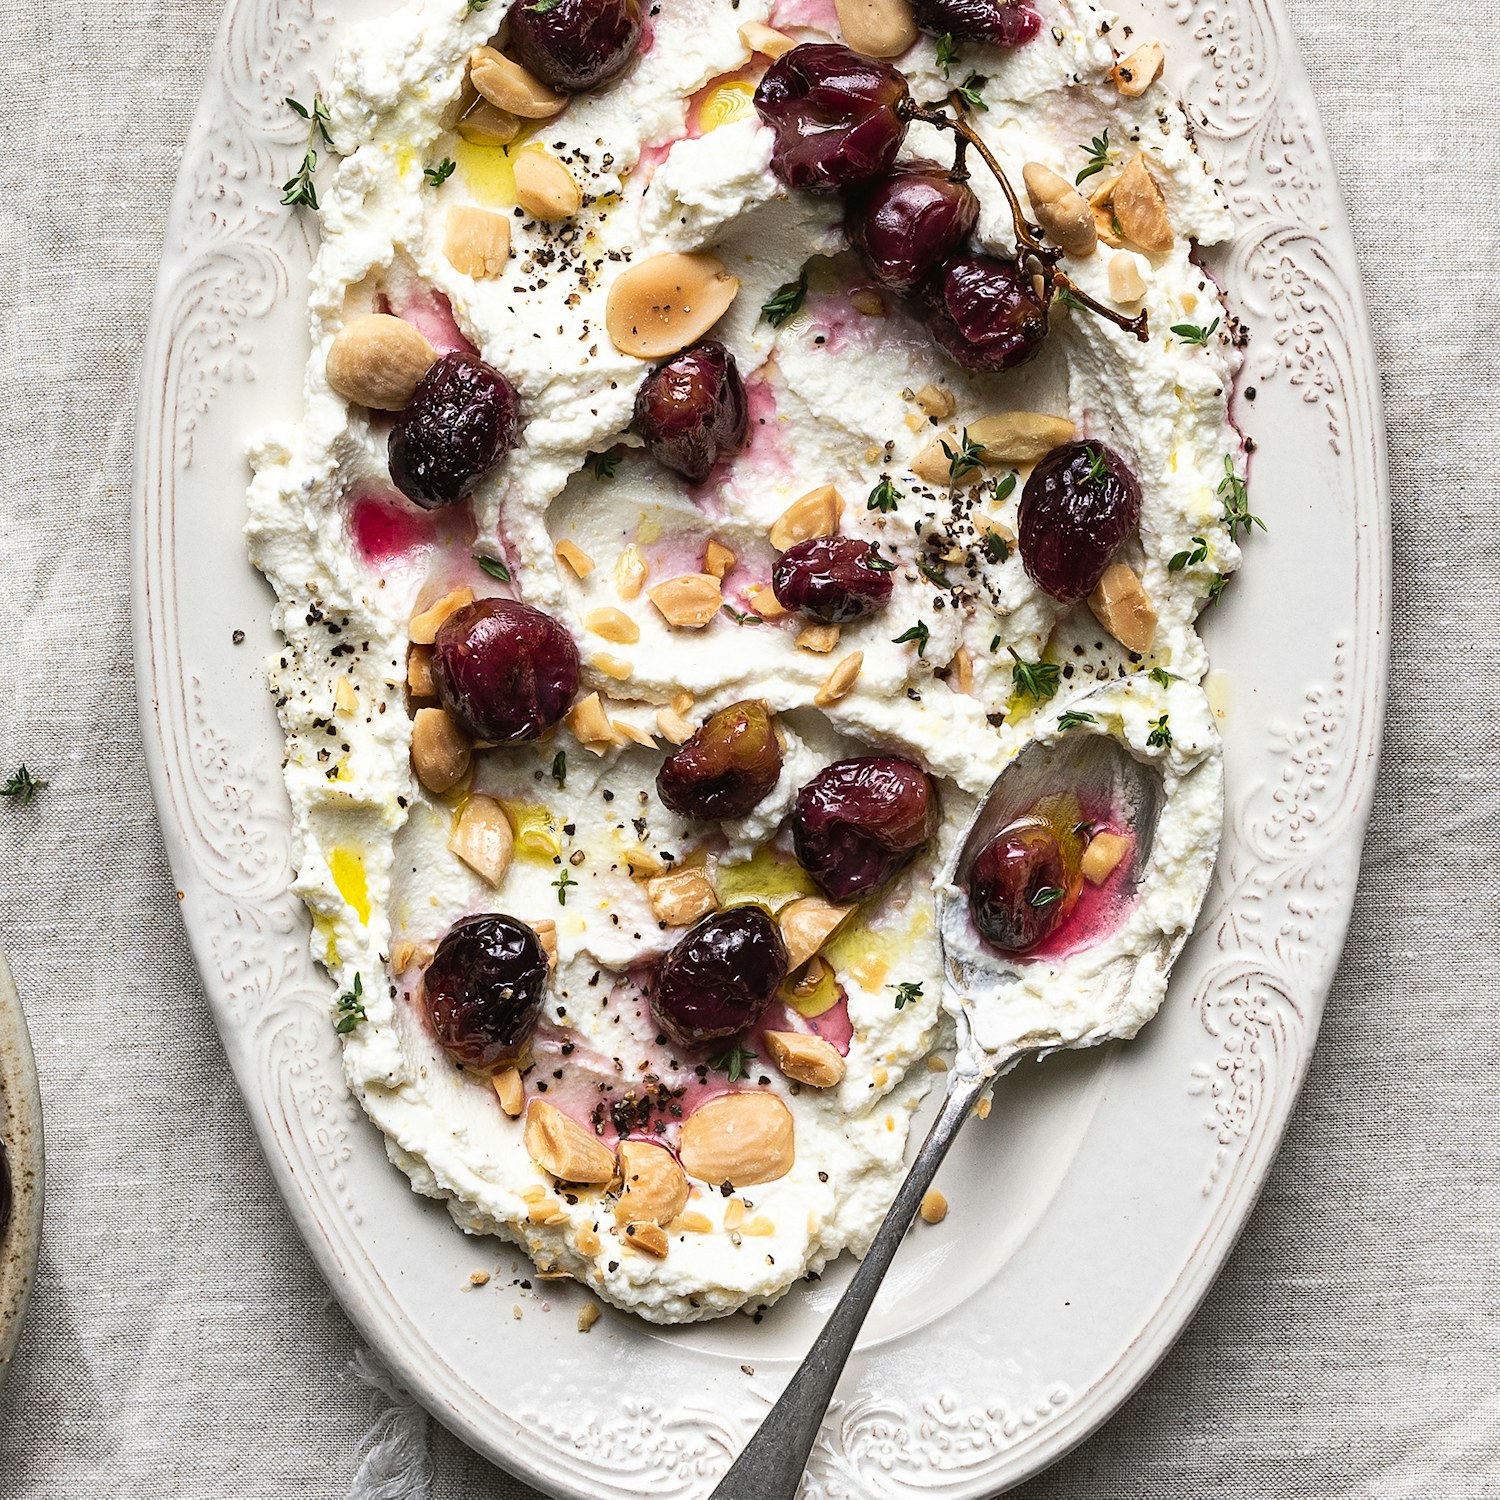 Whipped Ricotta, Roasted Grape & Salted Almond Dip